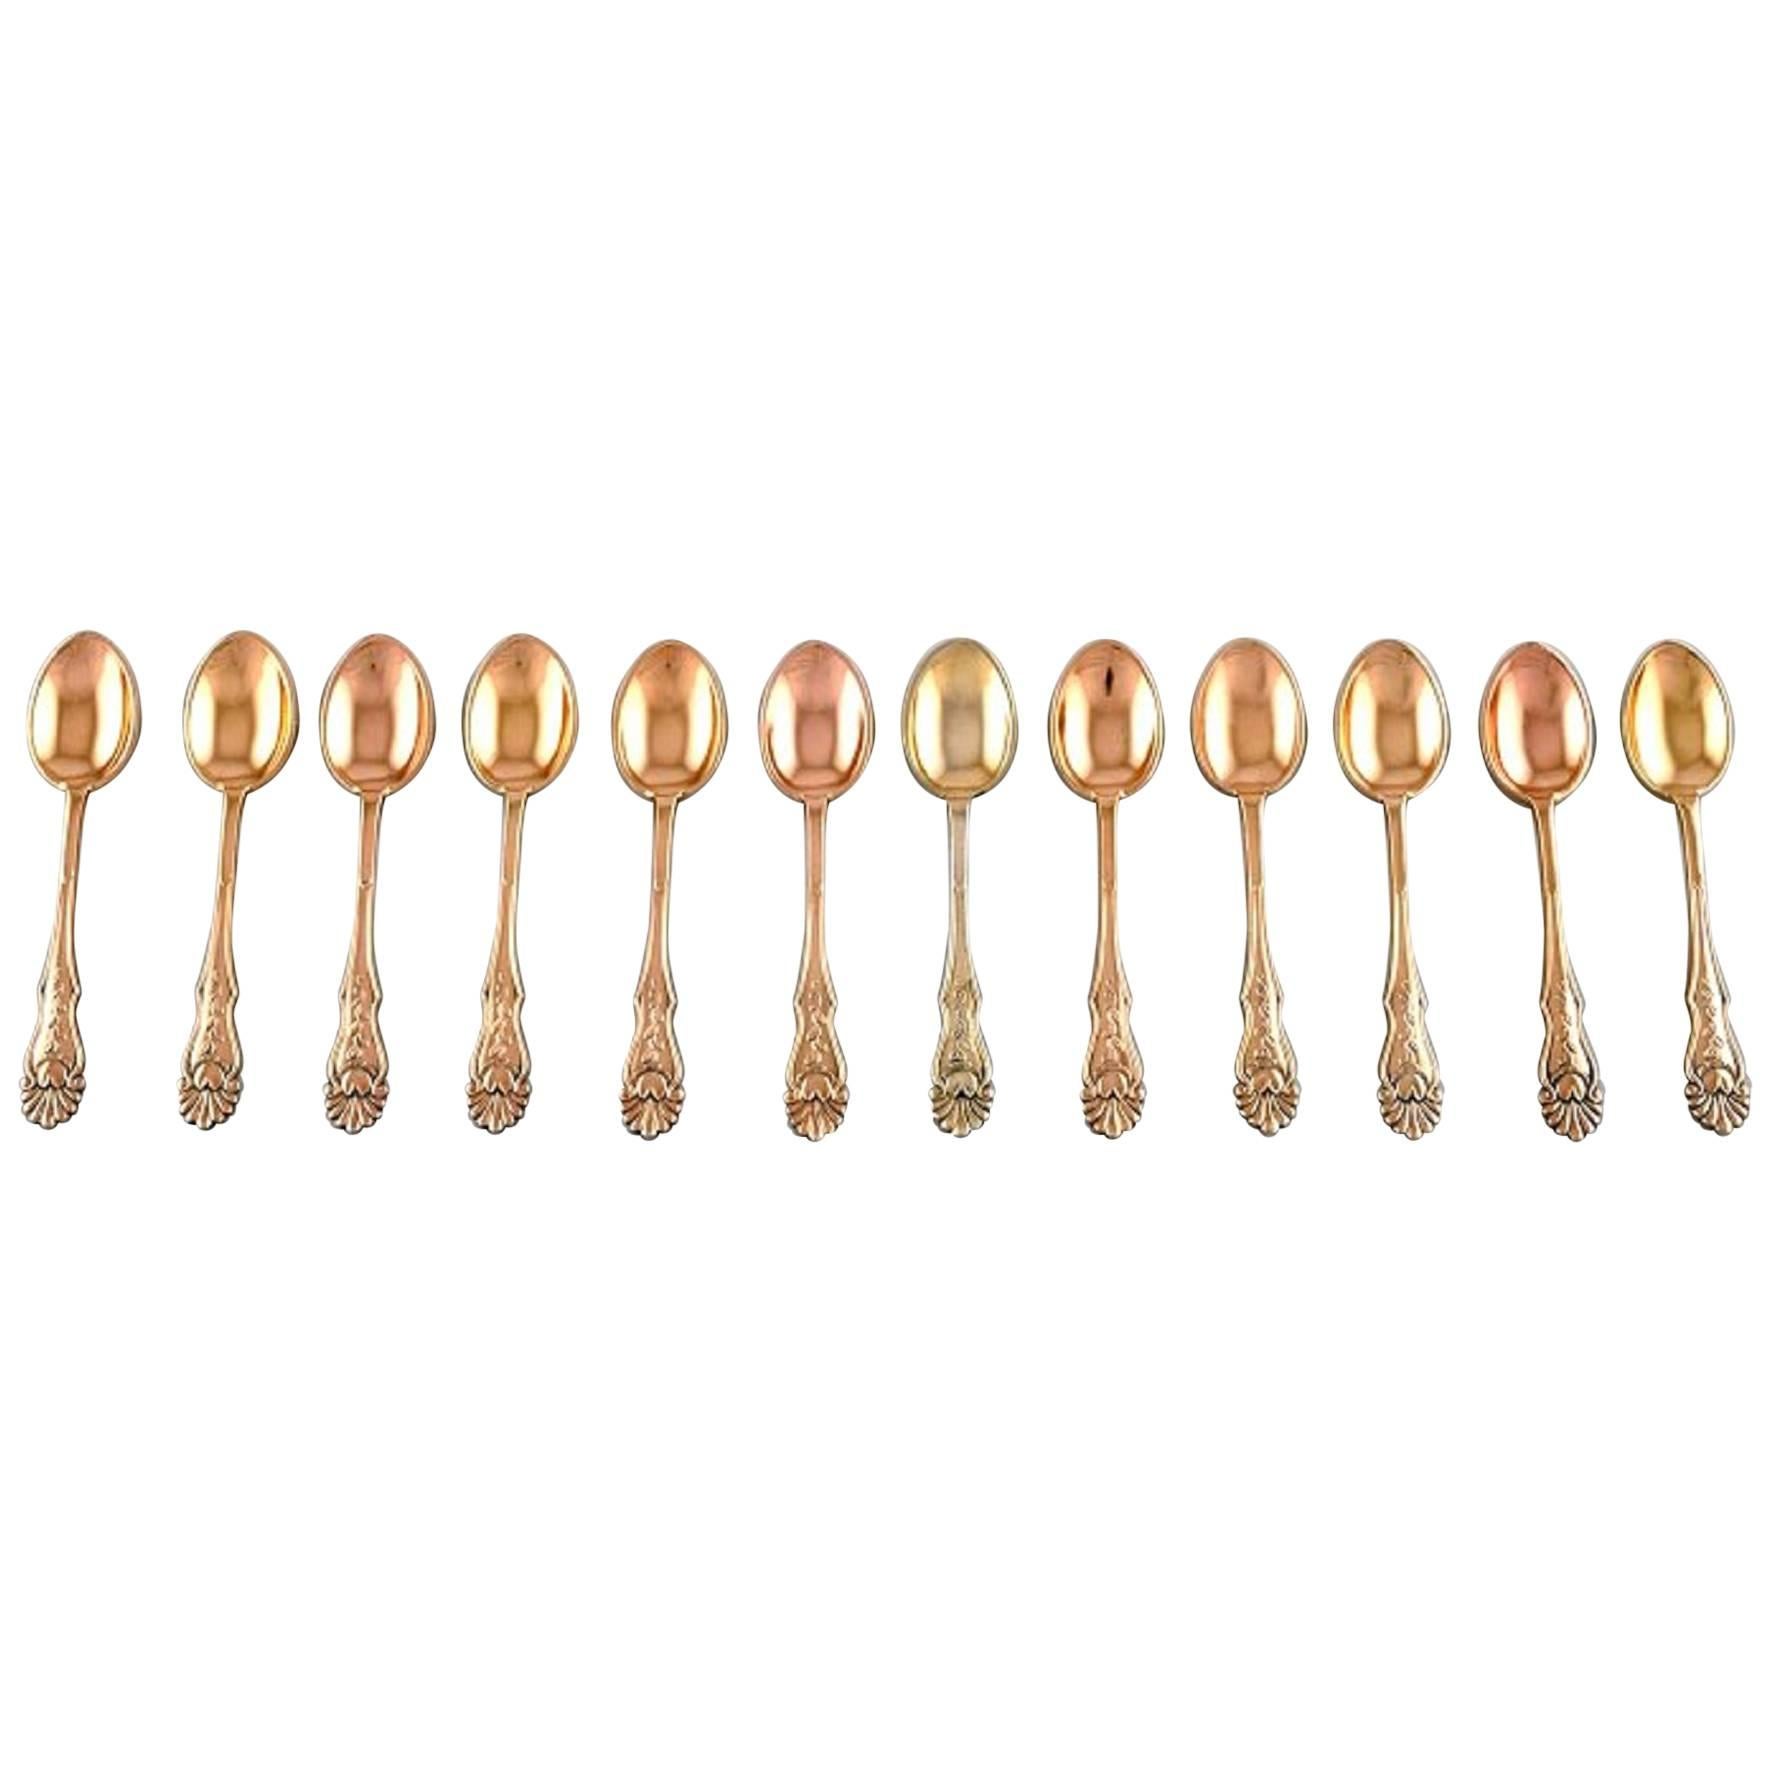 12 Danish Mocha Spoons in Gilded Silver, Approximate 1930s